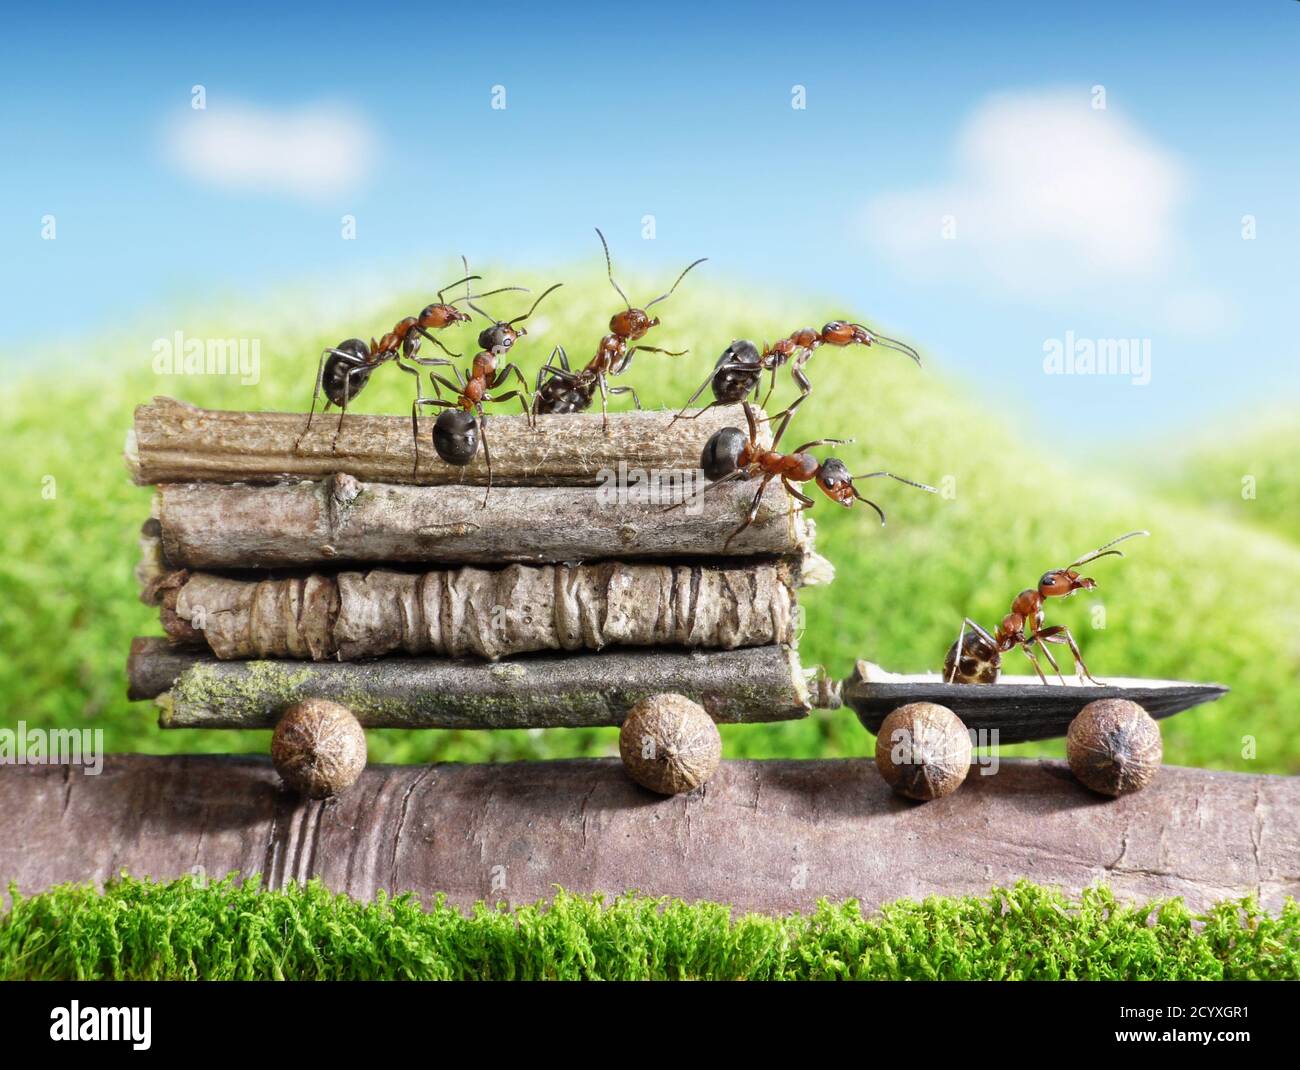 All good work is done the way ants do things: Little by little. Stock Photo